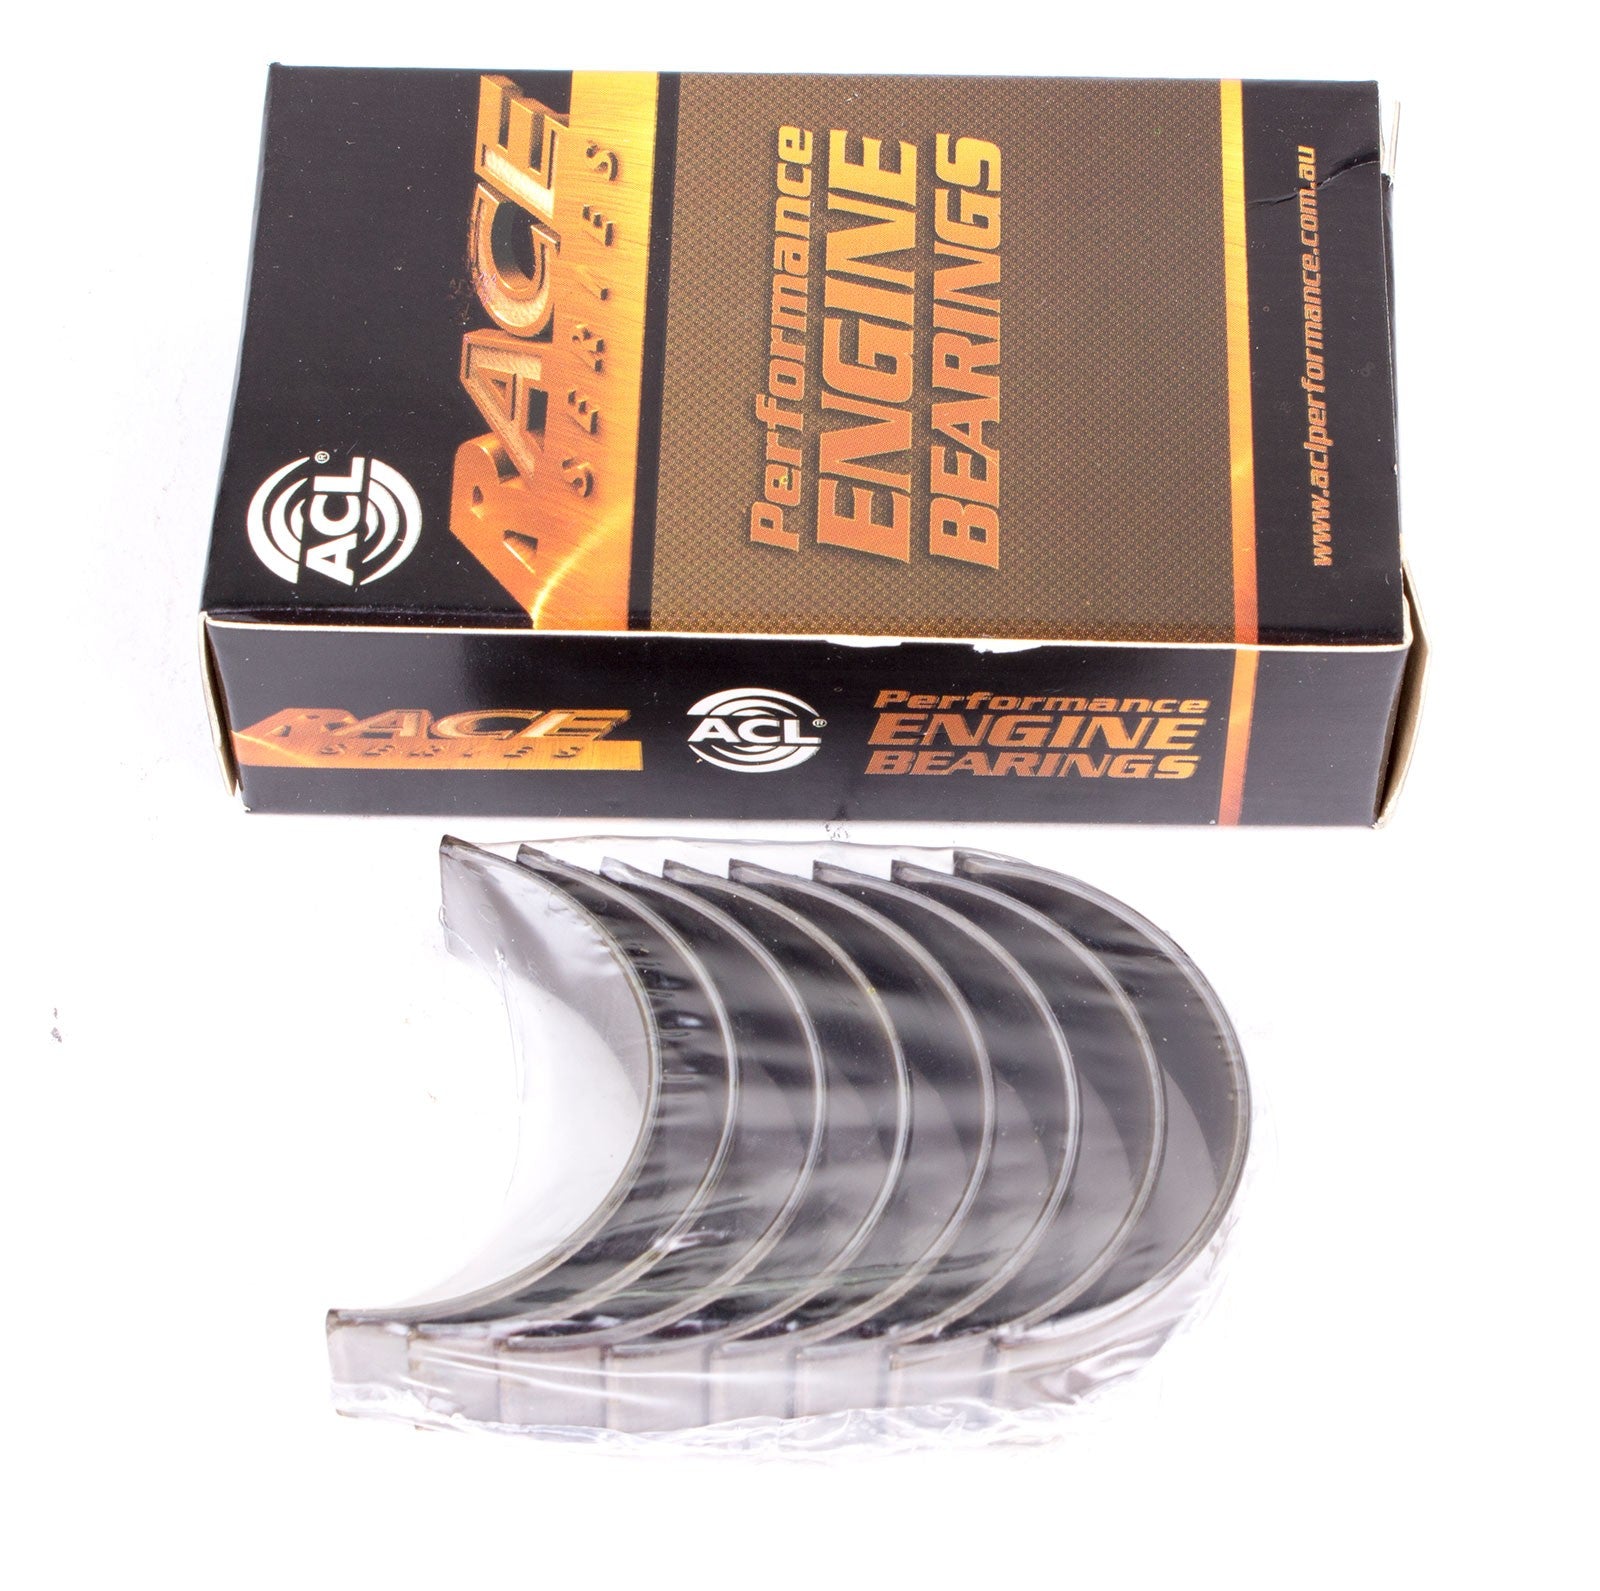 ACL 5M909H-20 Main bearing set (ACL Race Series) Photo-0 